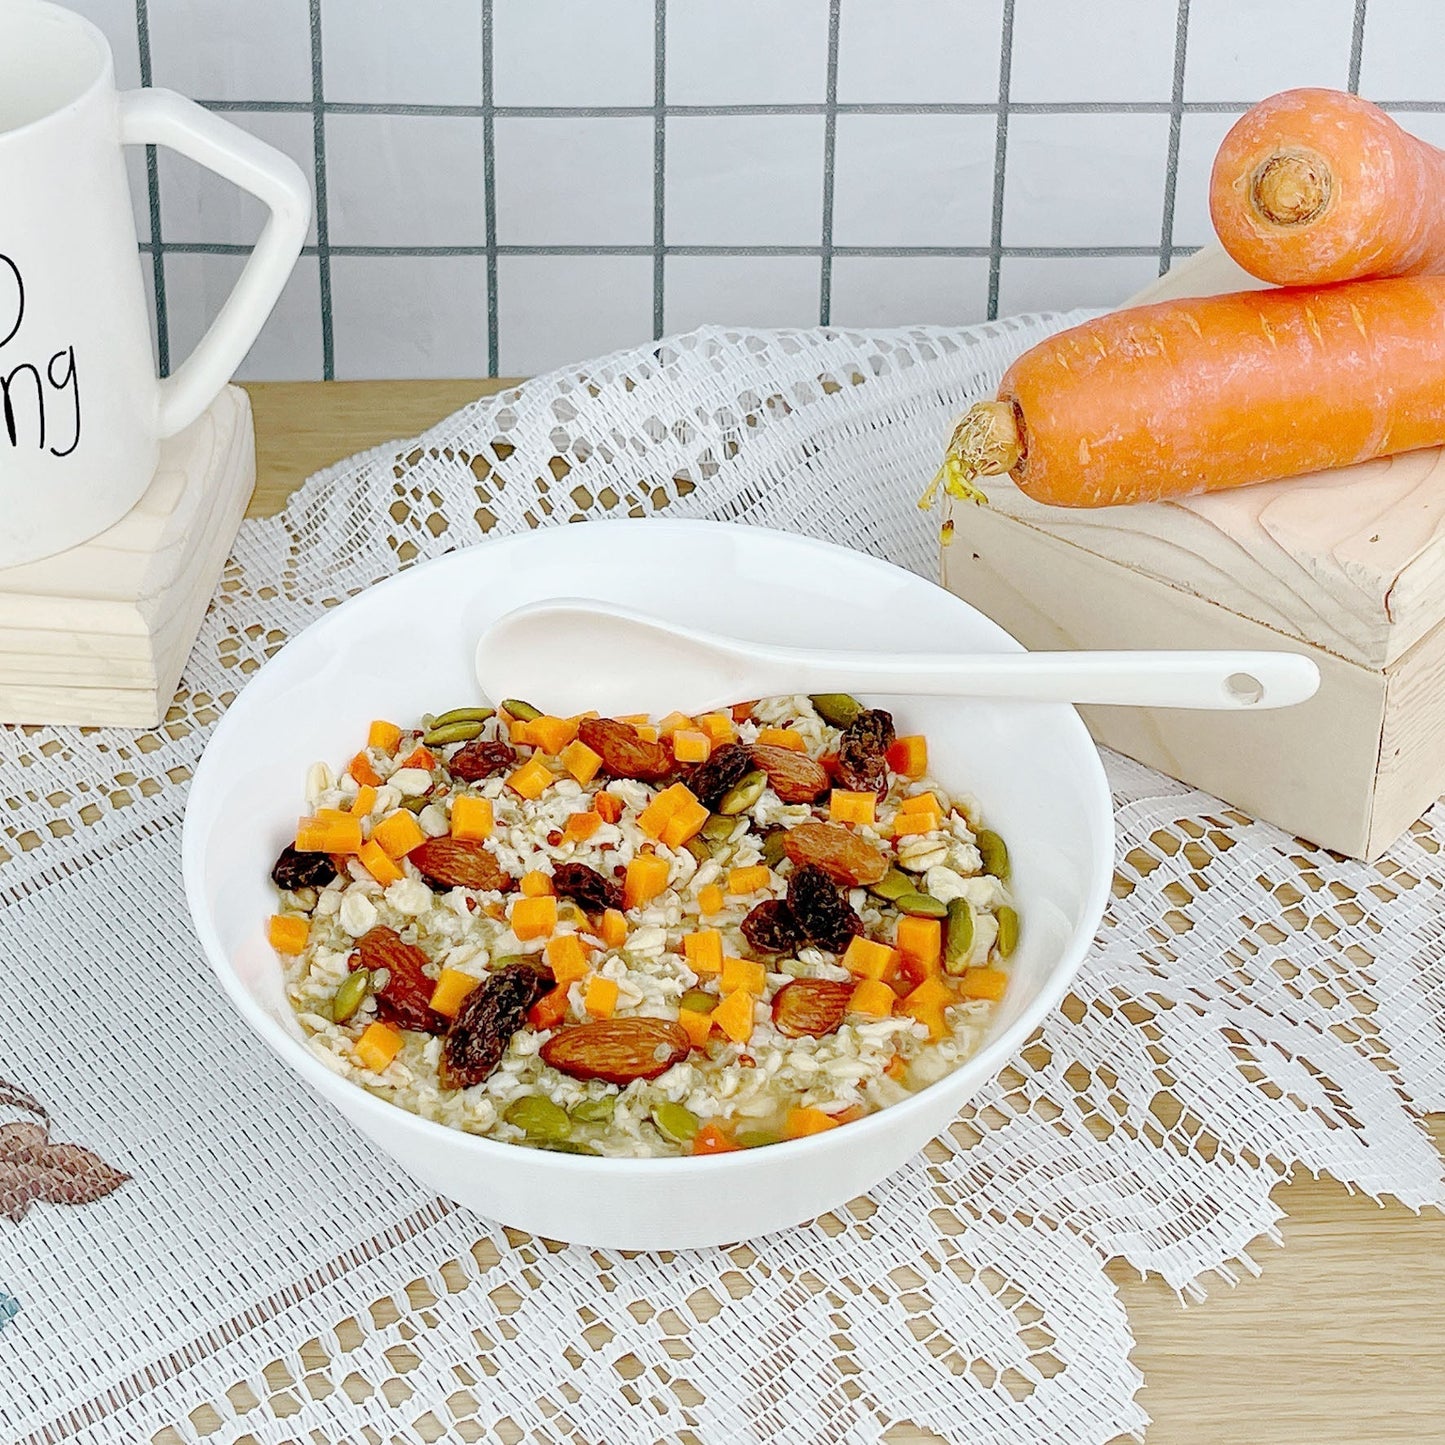 Newly Launched!  Hot Oat Bowl-Pumpkin Carrots (3 Pax)